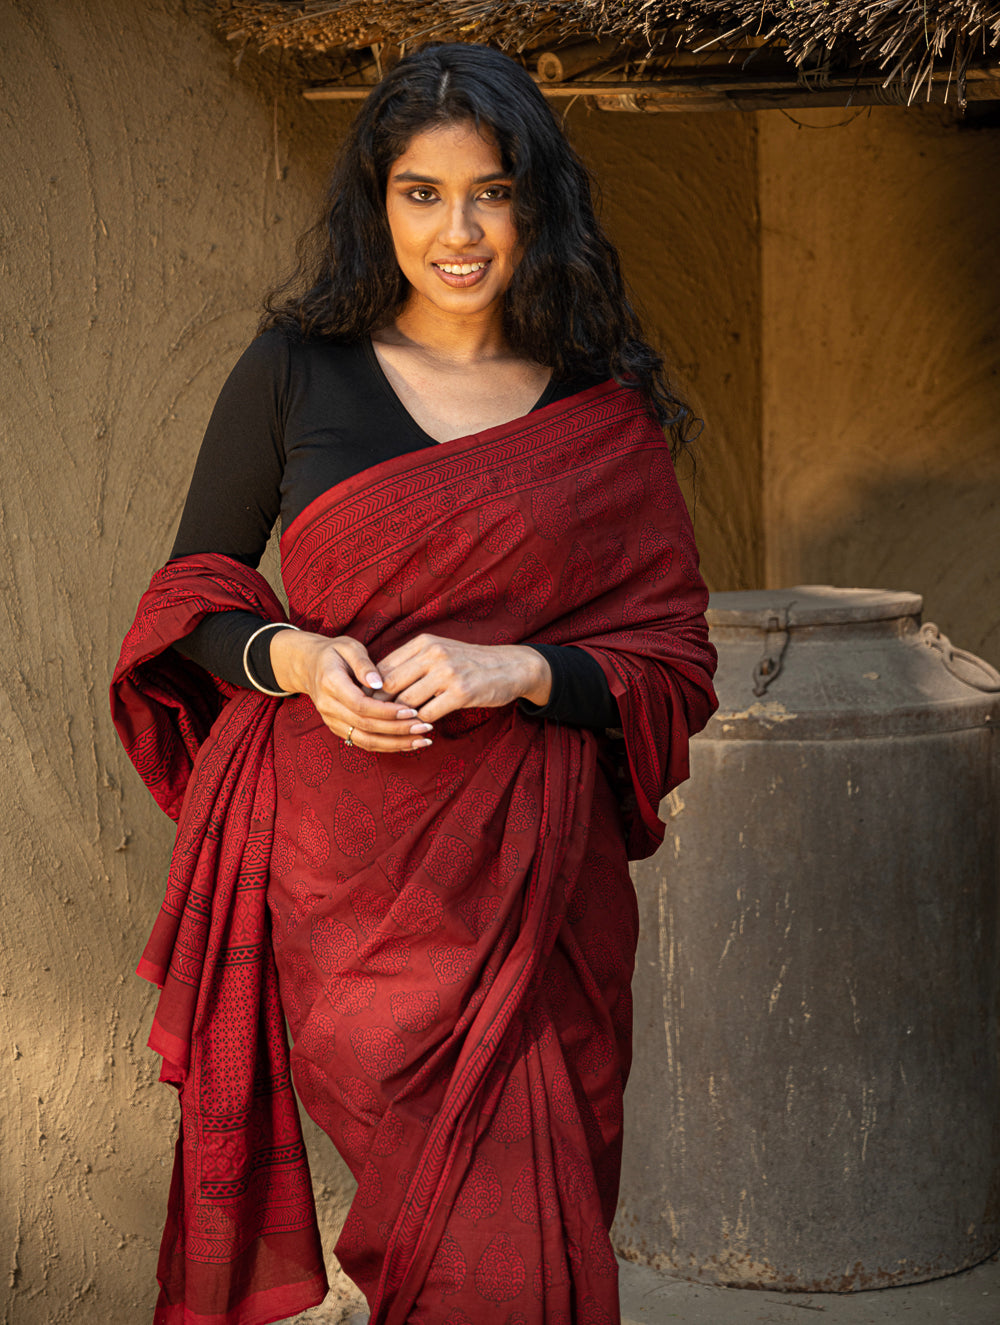 Load image into Gallery viewer, Exclusive Bagh Hand Block Printed Cotton Saree -  Red Paan